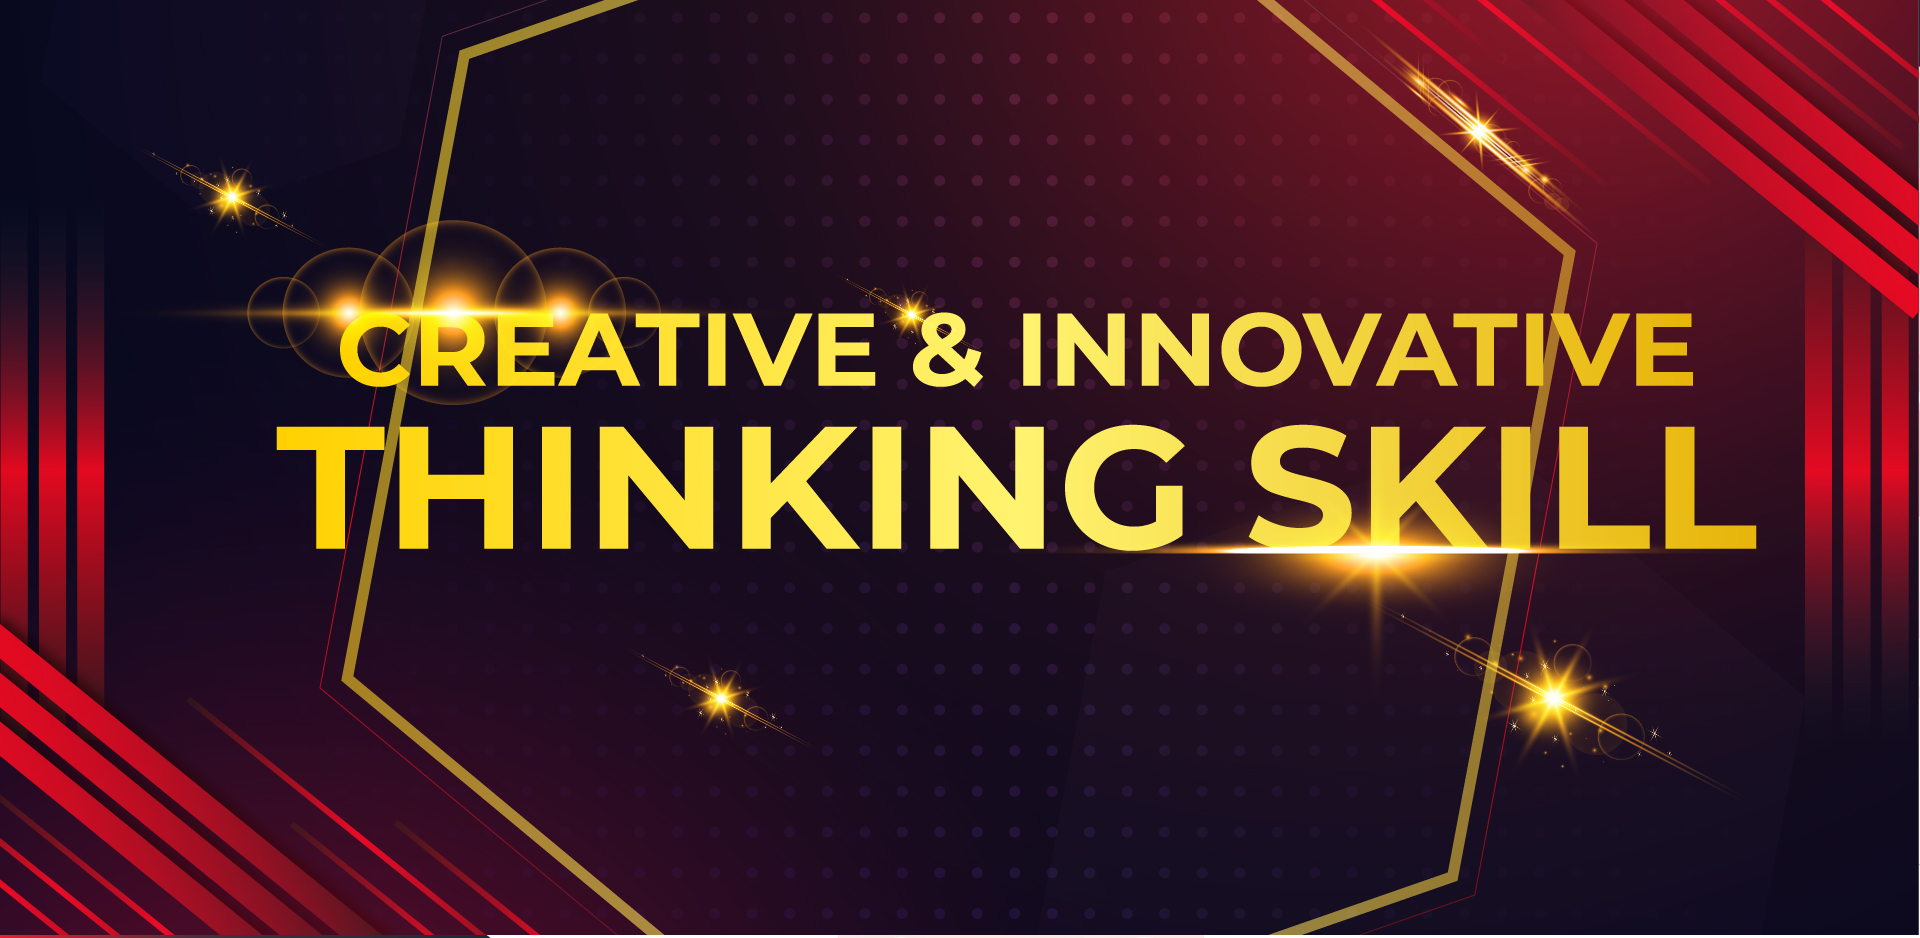 CREATIVE & INNOVATIVE THINKING: Improve Your Global Competition in Post Pandemic with Creative & Innovative Thinking